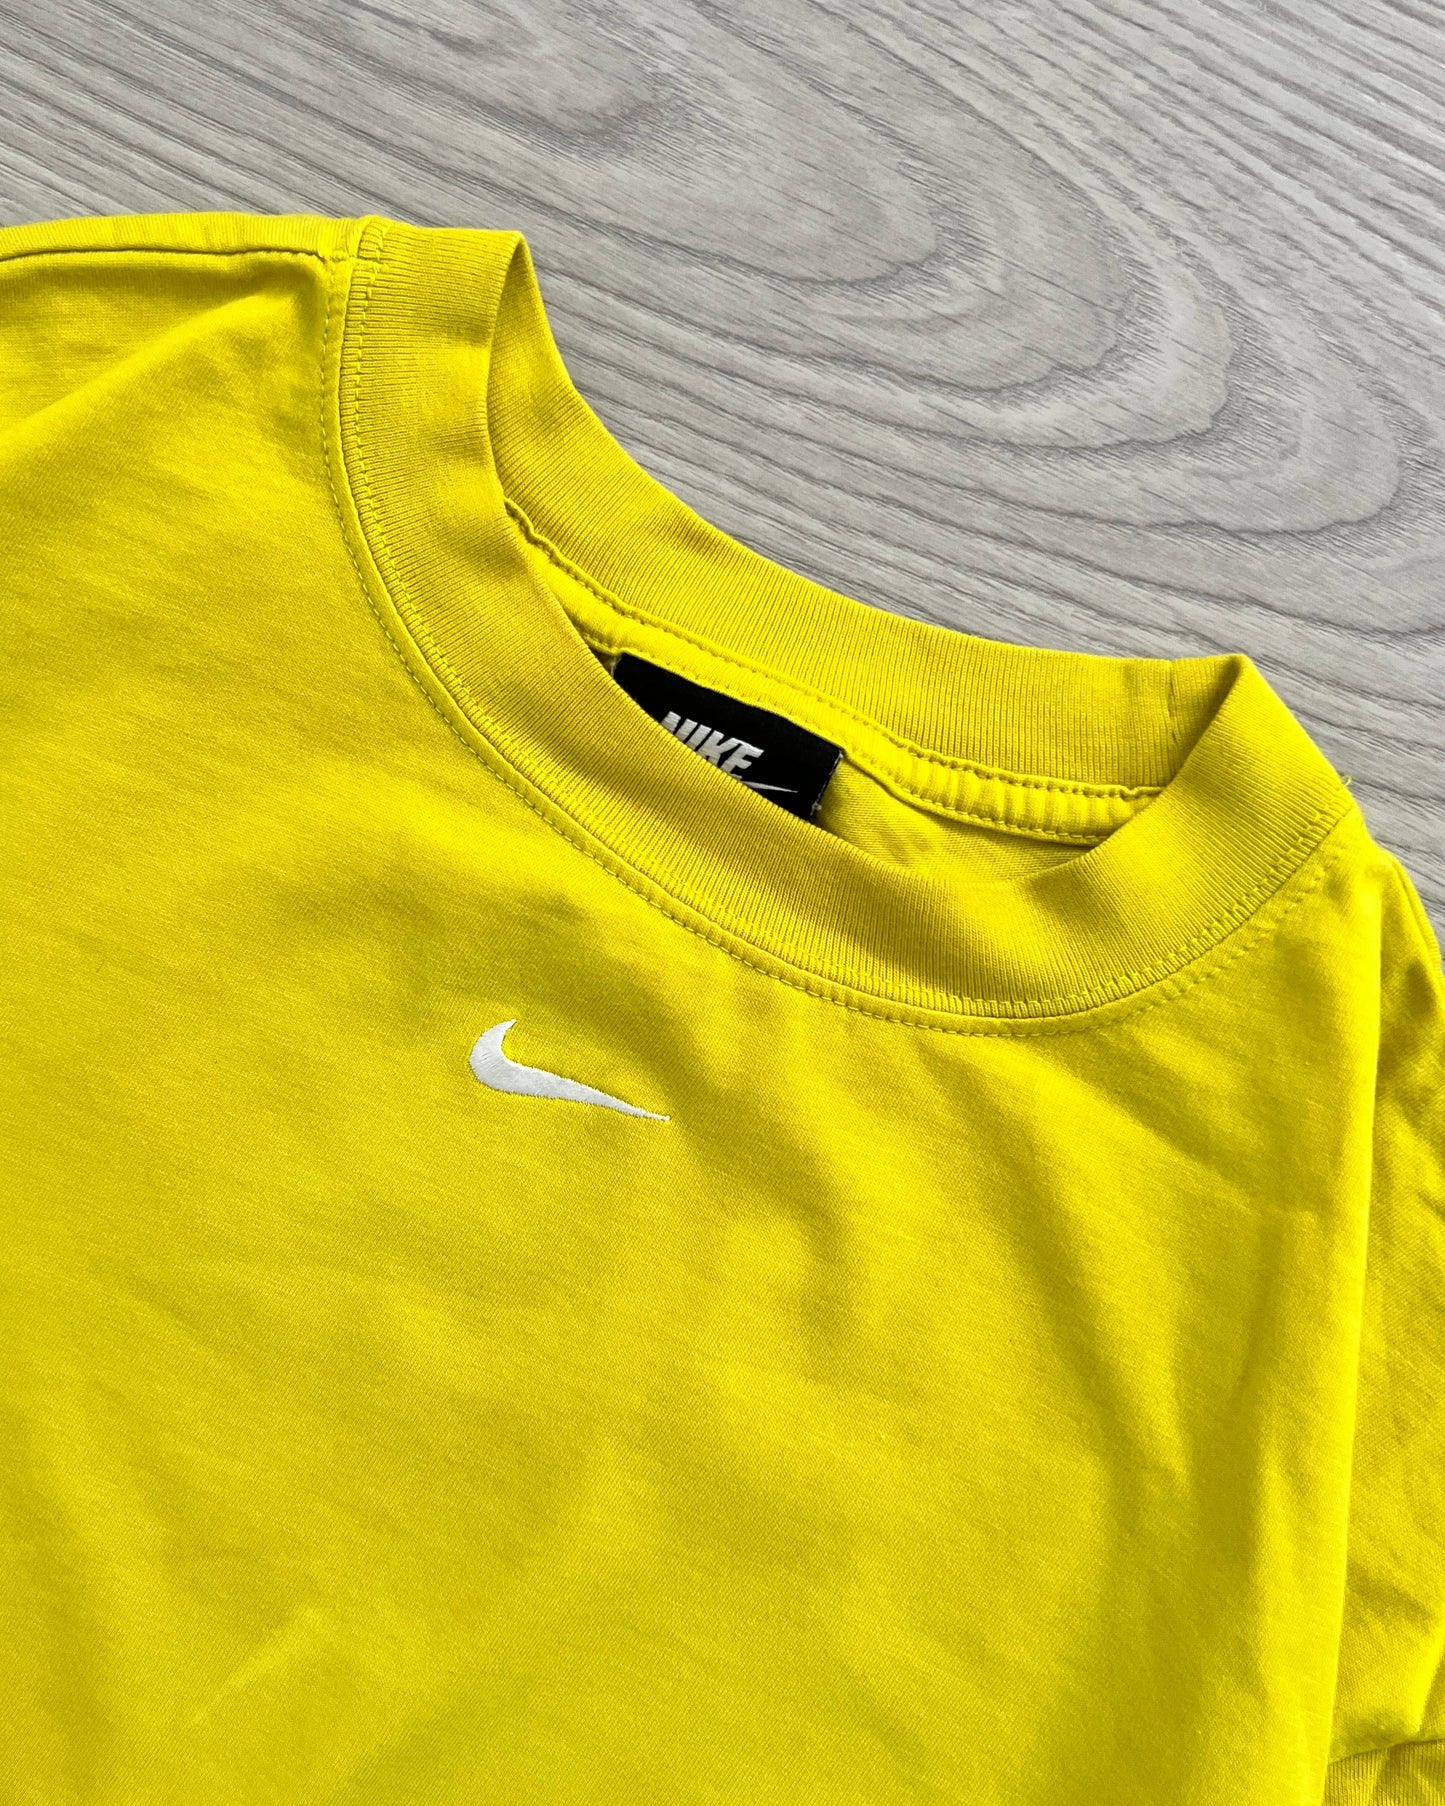 Nike Embroidered Centre Swoosh T-Shirt - Size M